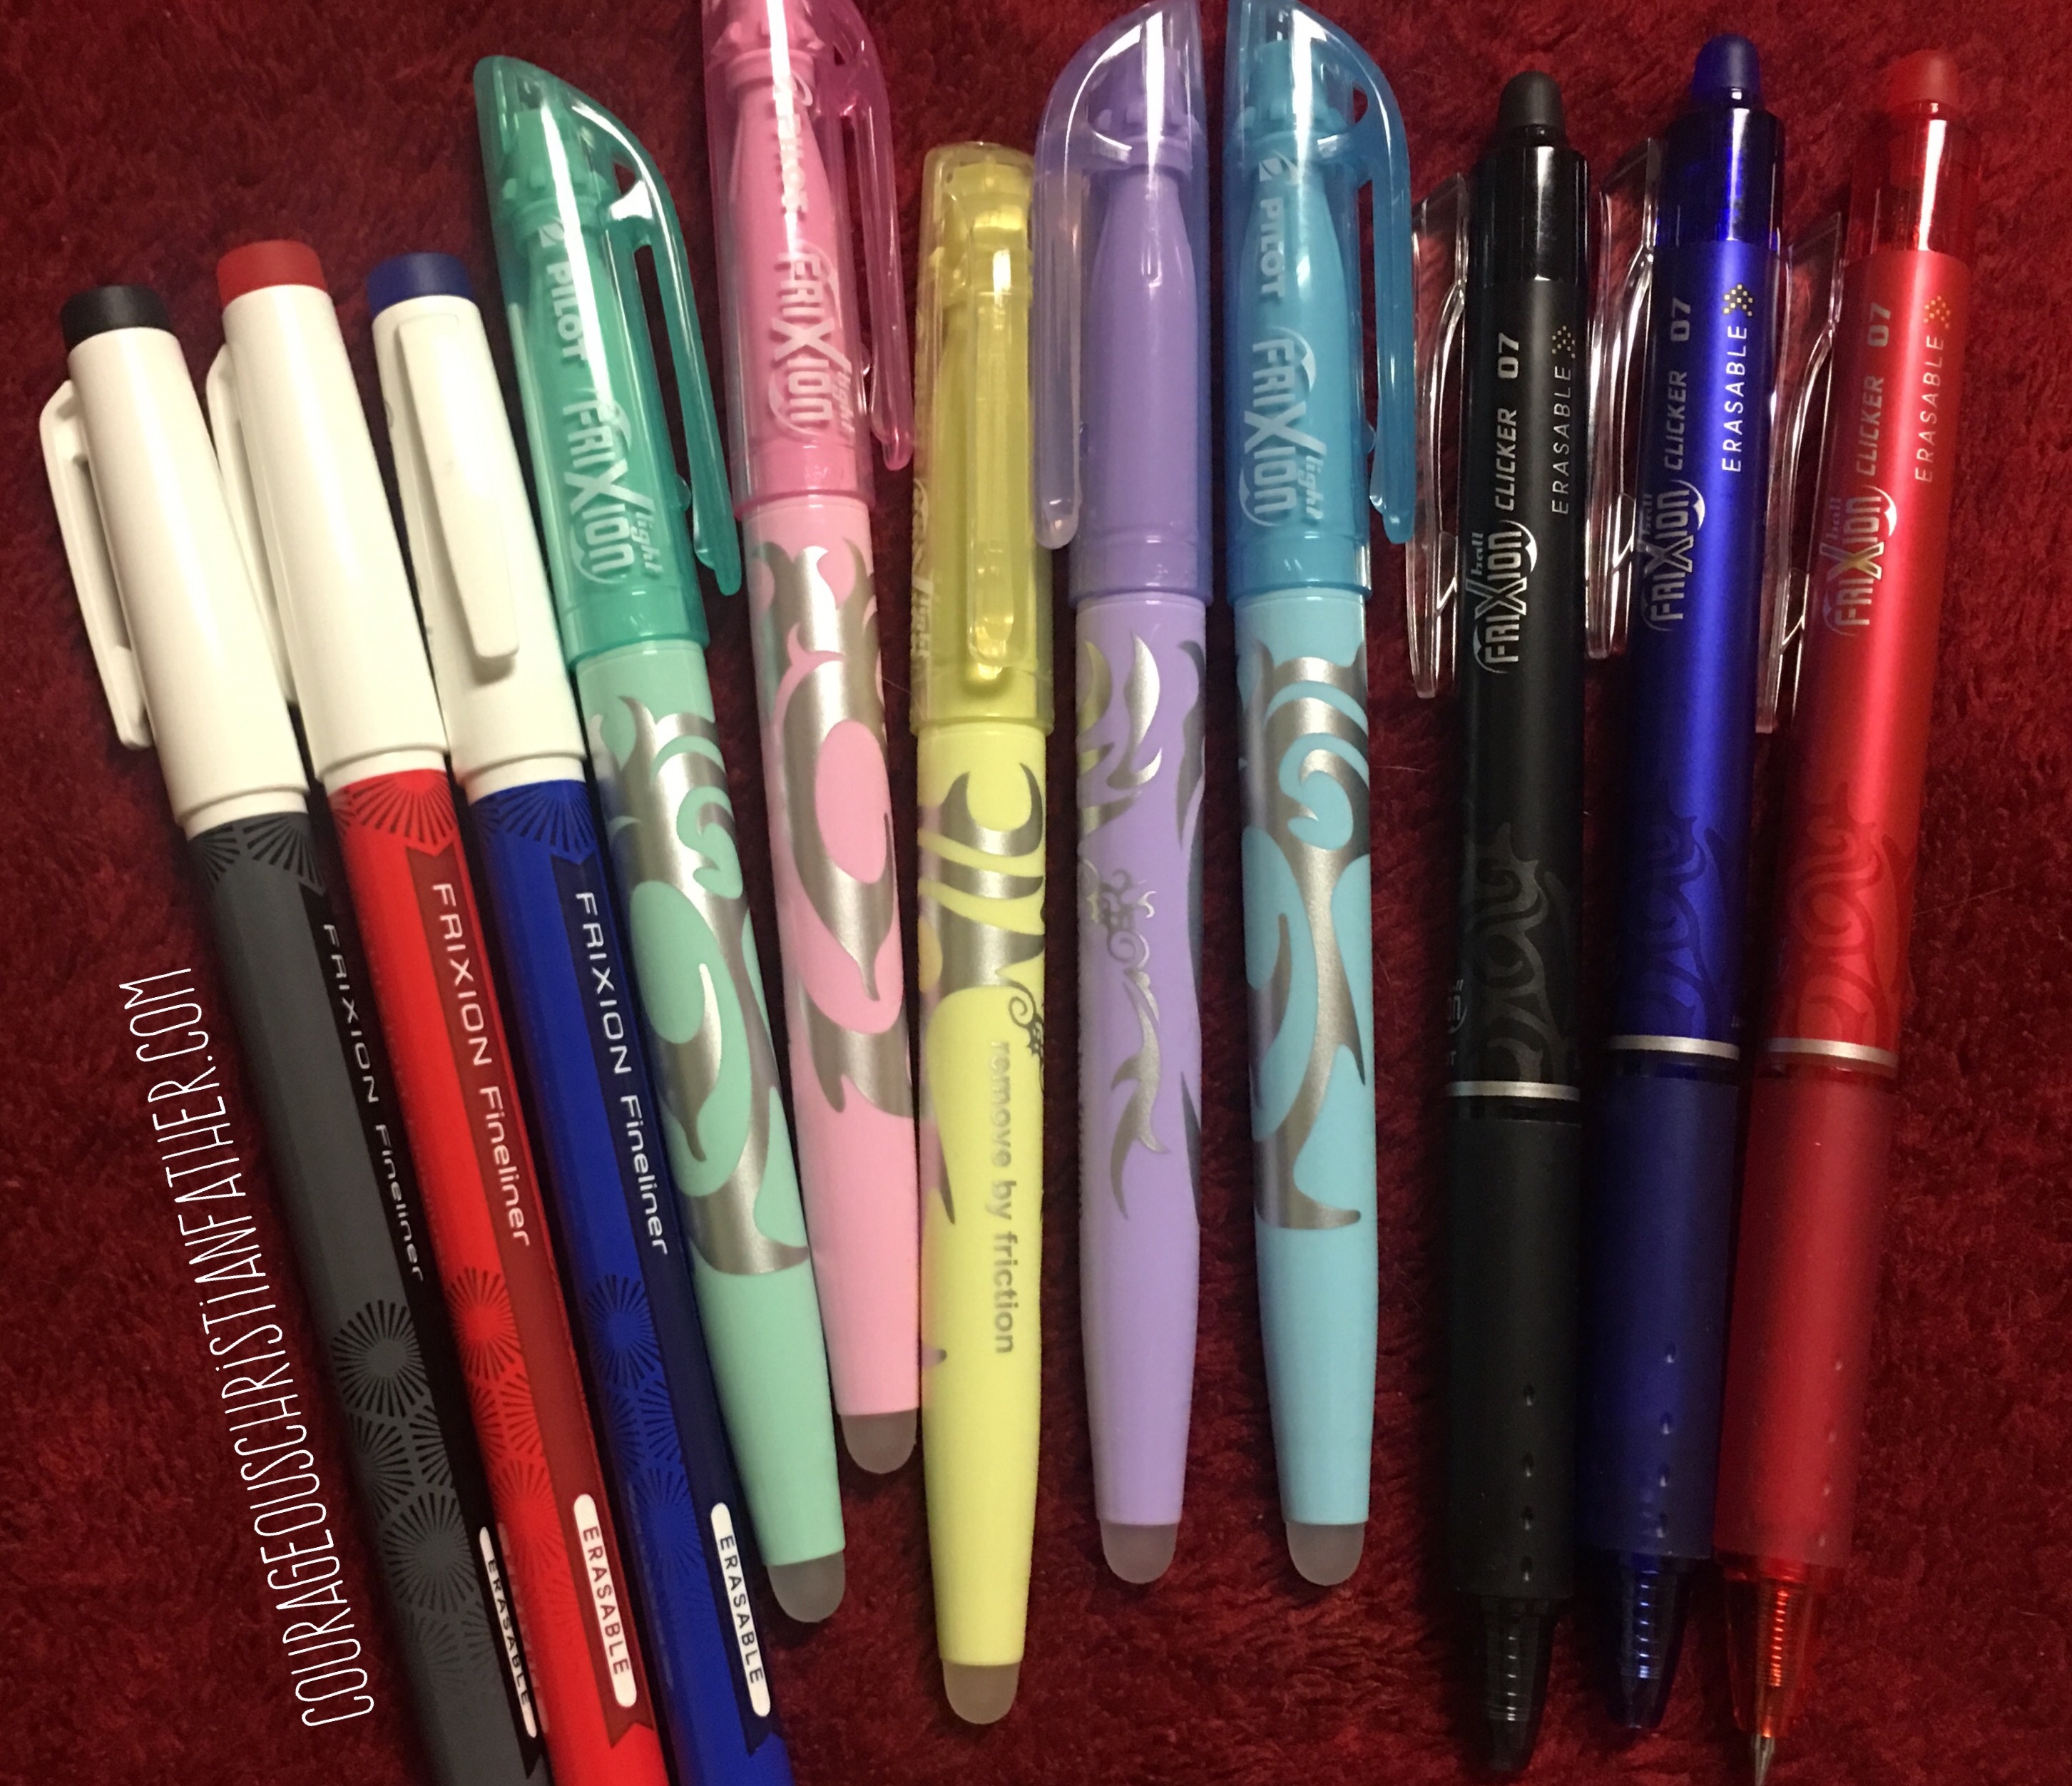 Some of the Pilot FriXon series | Photo Credit: Steve Patterson  (Pens to use on a Rocketbook. I share what pens, writing devices you can use on a Rocketbook. The answer to that is ...)